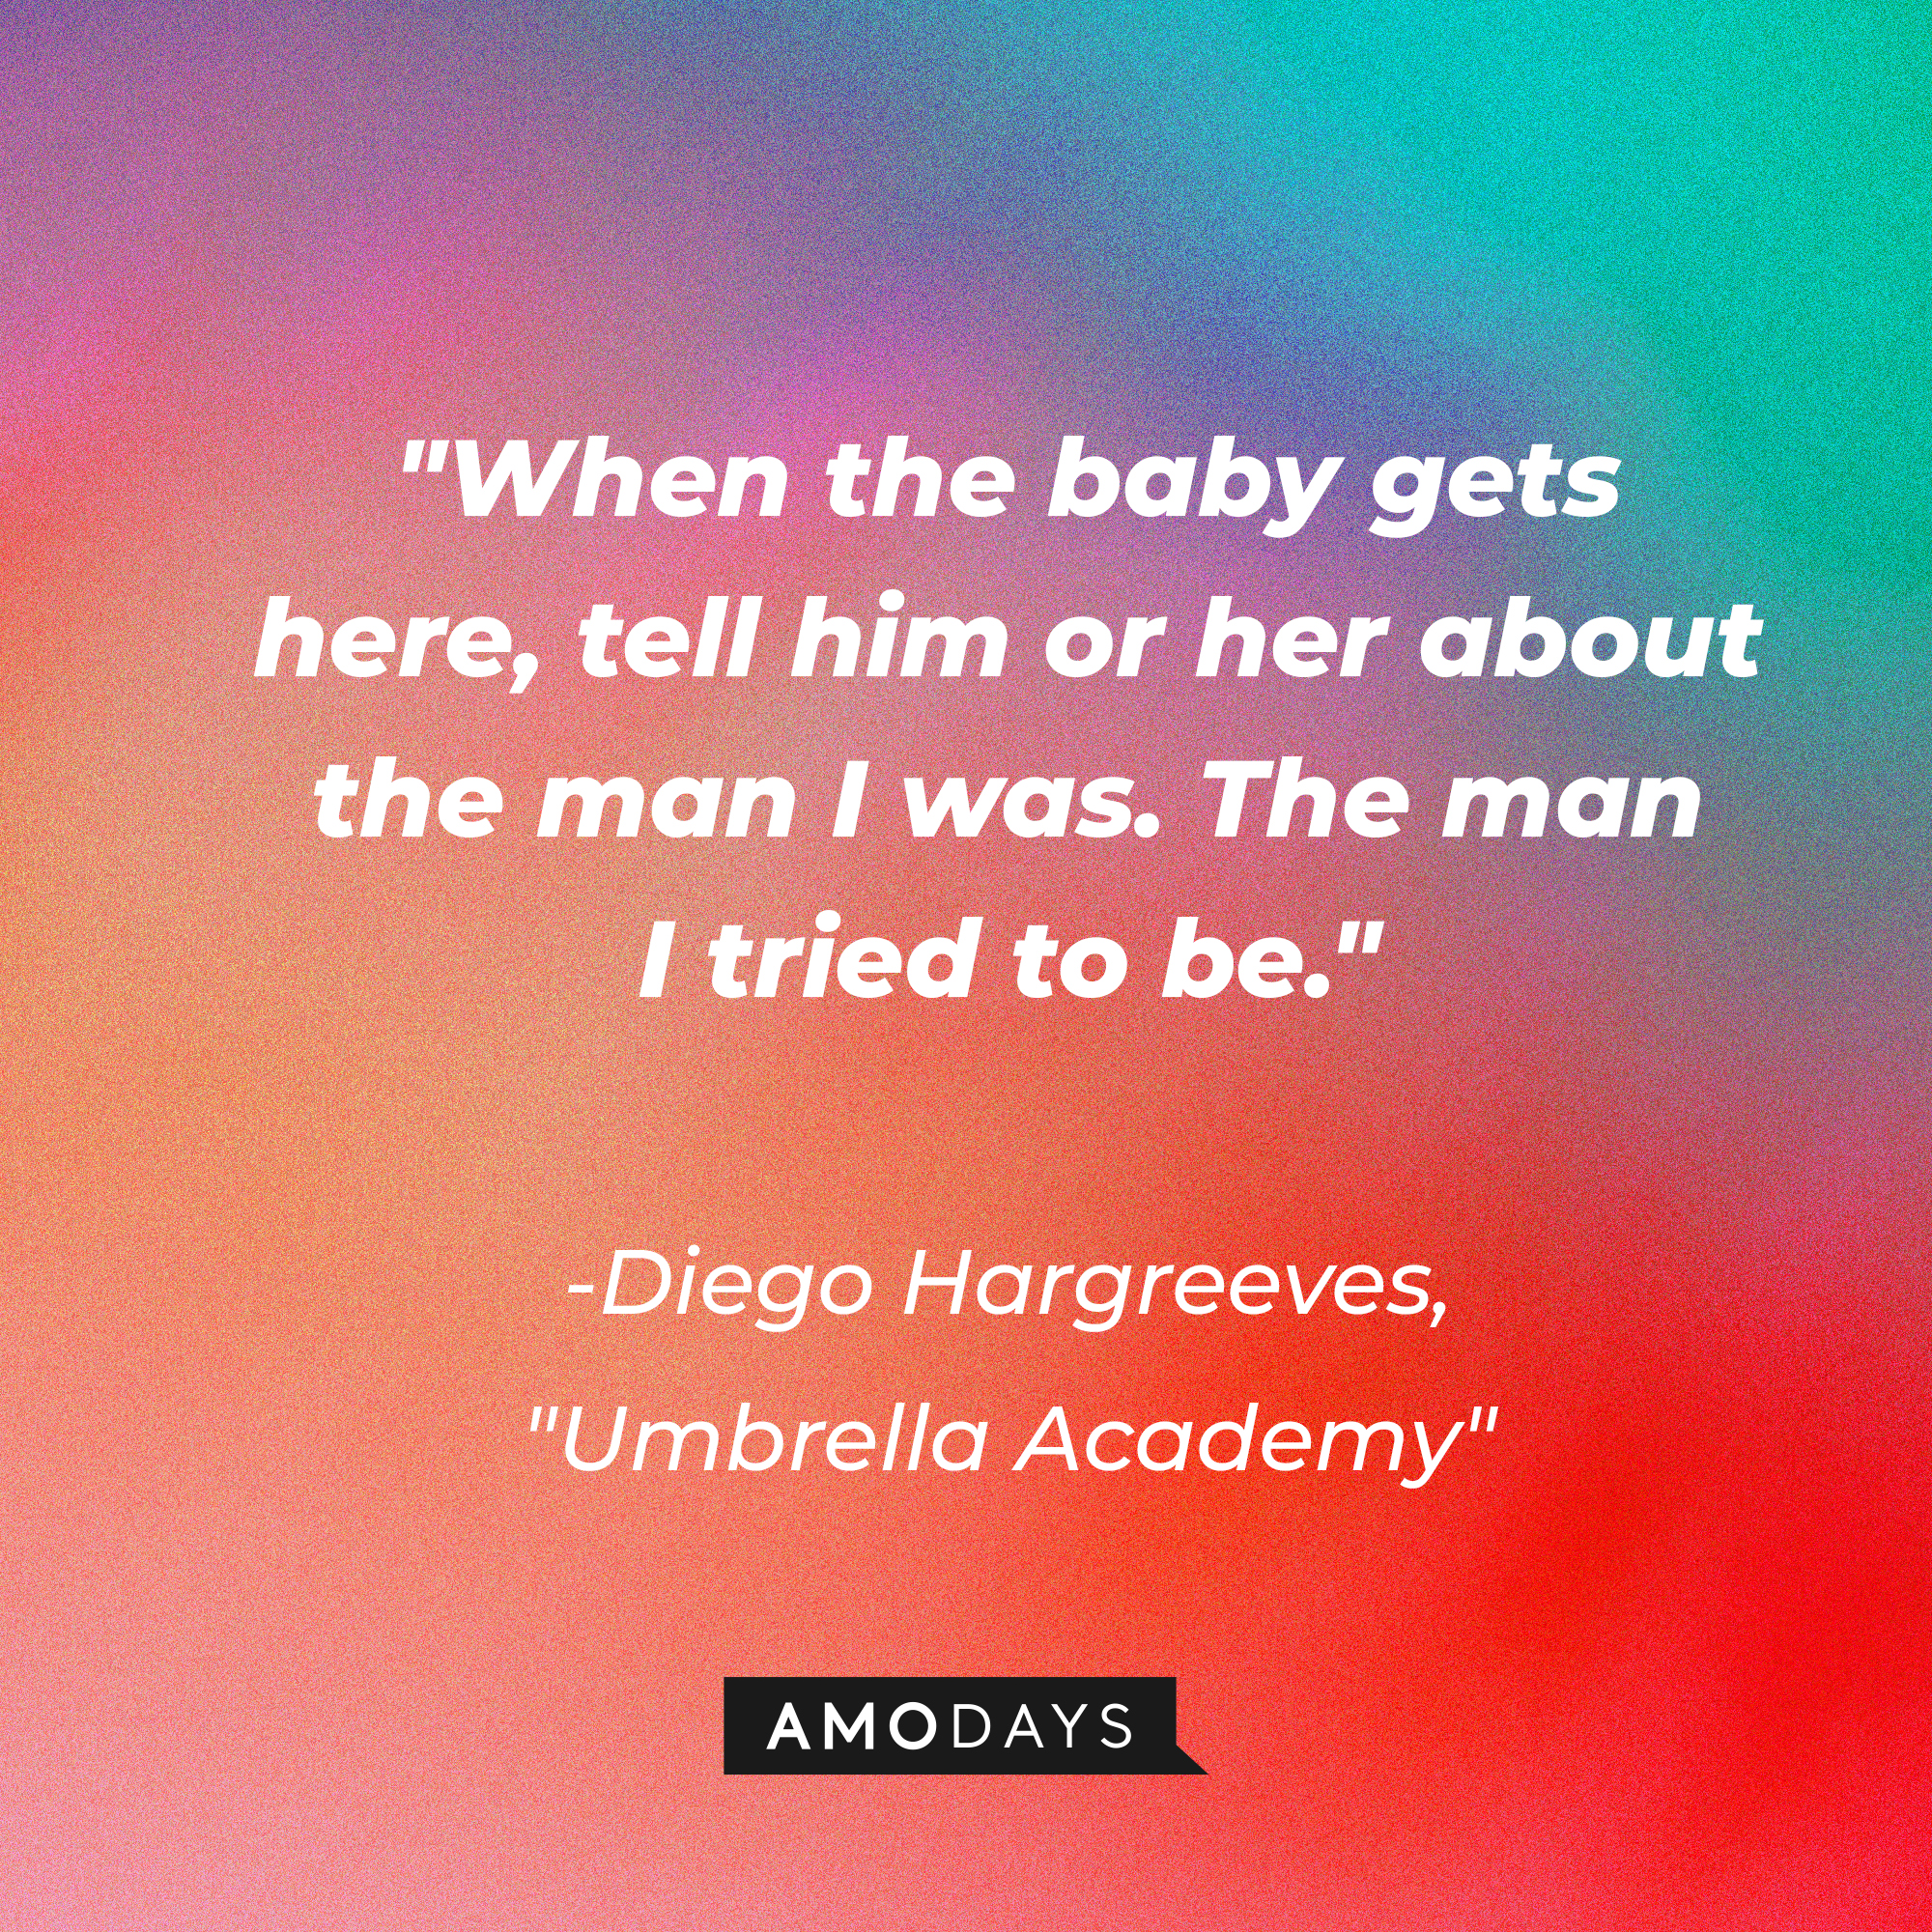 Diego Hargreeves' quote in "The Umbrella Academy:" “When the baby gets here, tell him or her about the man I was. The man I tried to be.” | Source: AmoDays